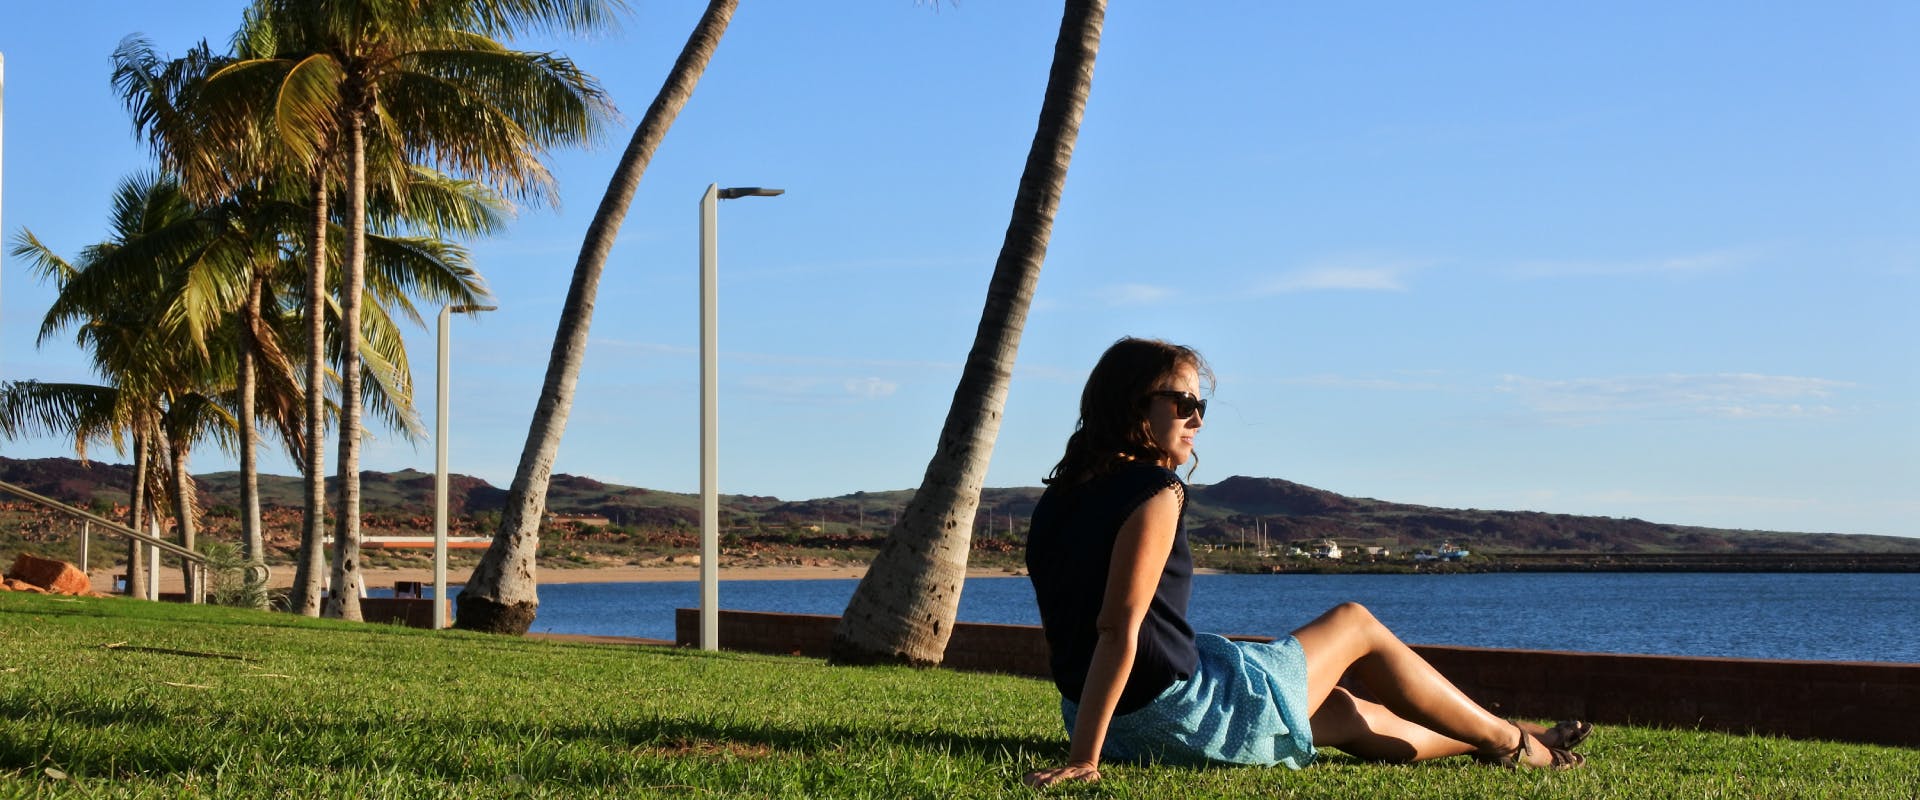 a coastline in australia with grass and palm trees and a solo female traveler sitting on the grass looking at the sea